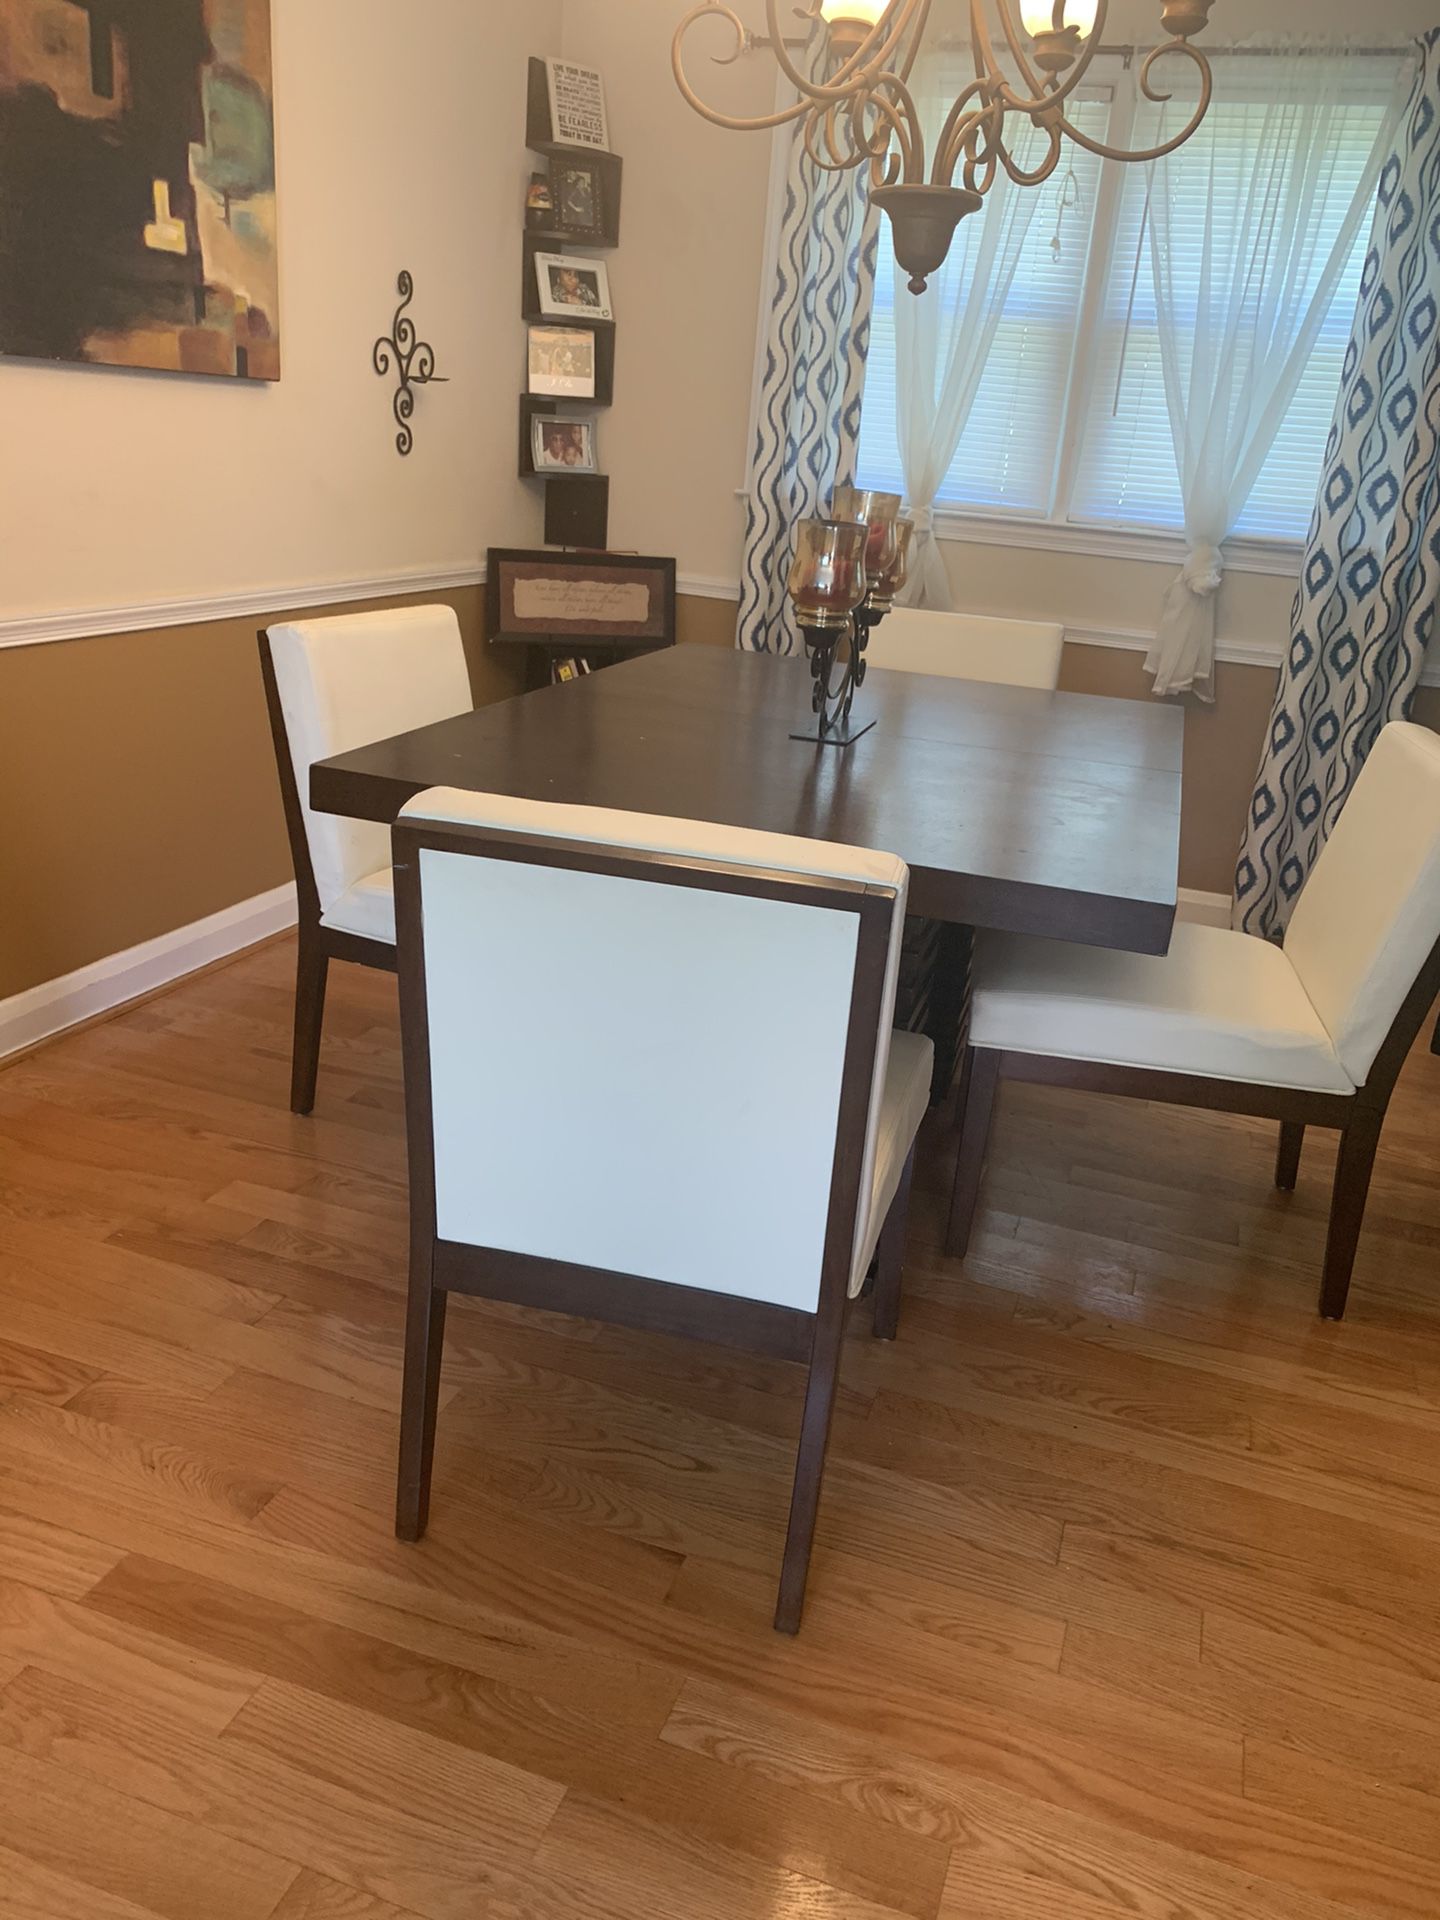 4 Dining Room Chairs only "White"